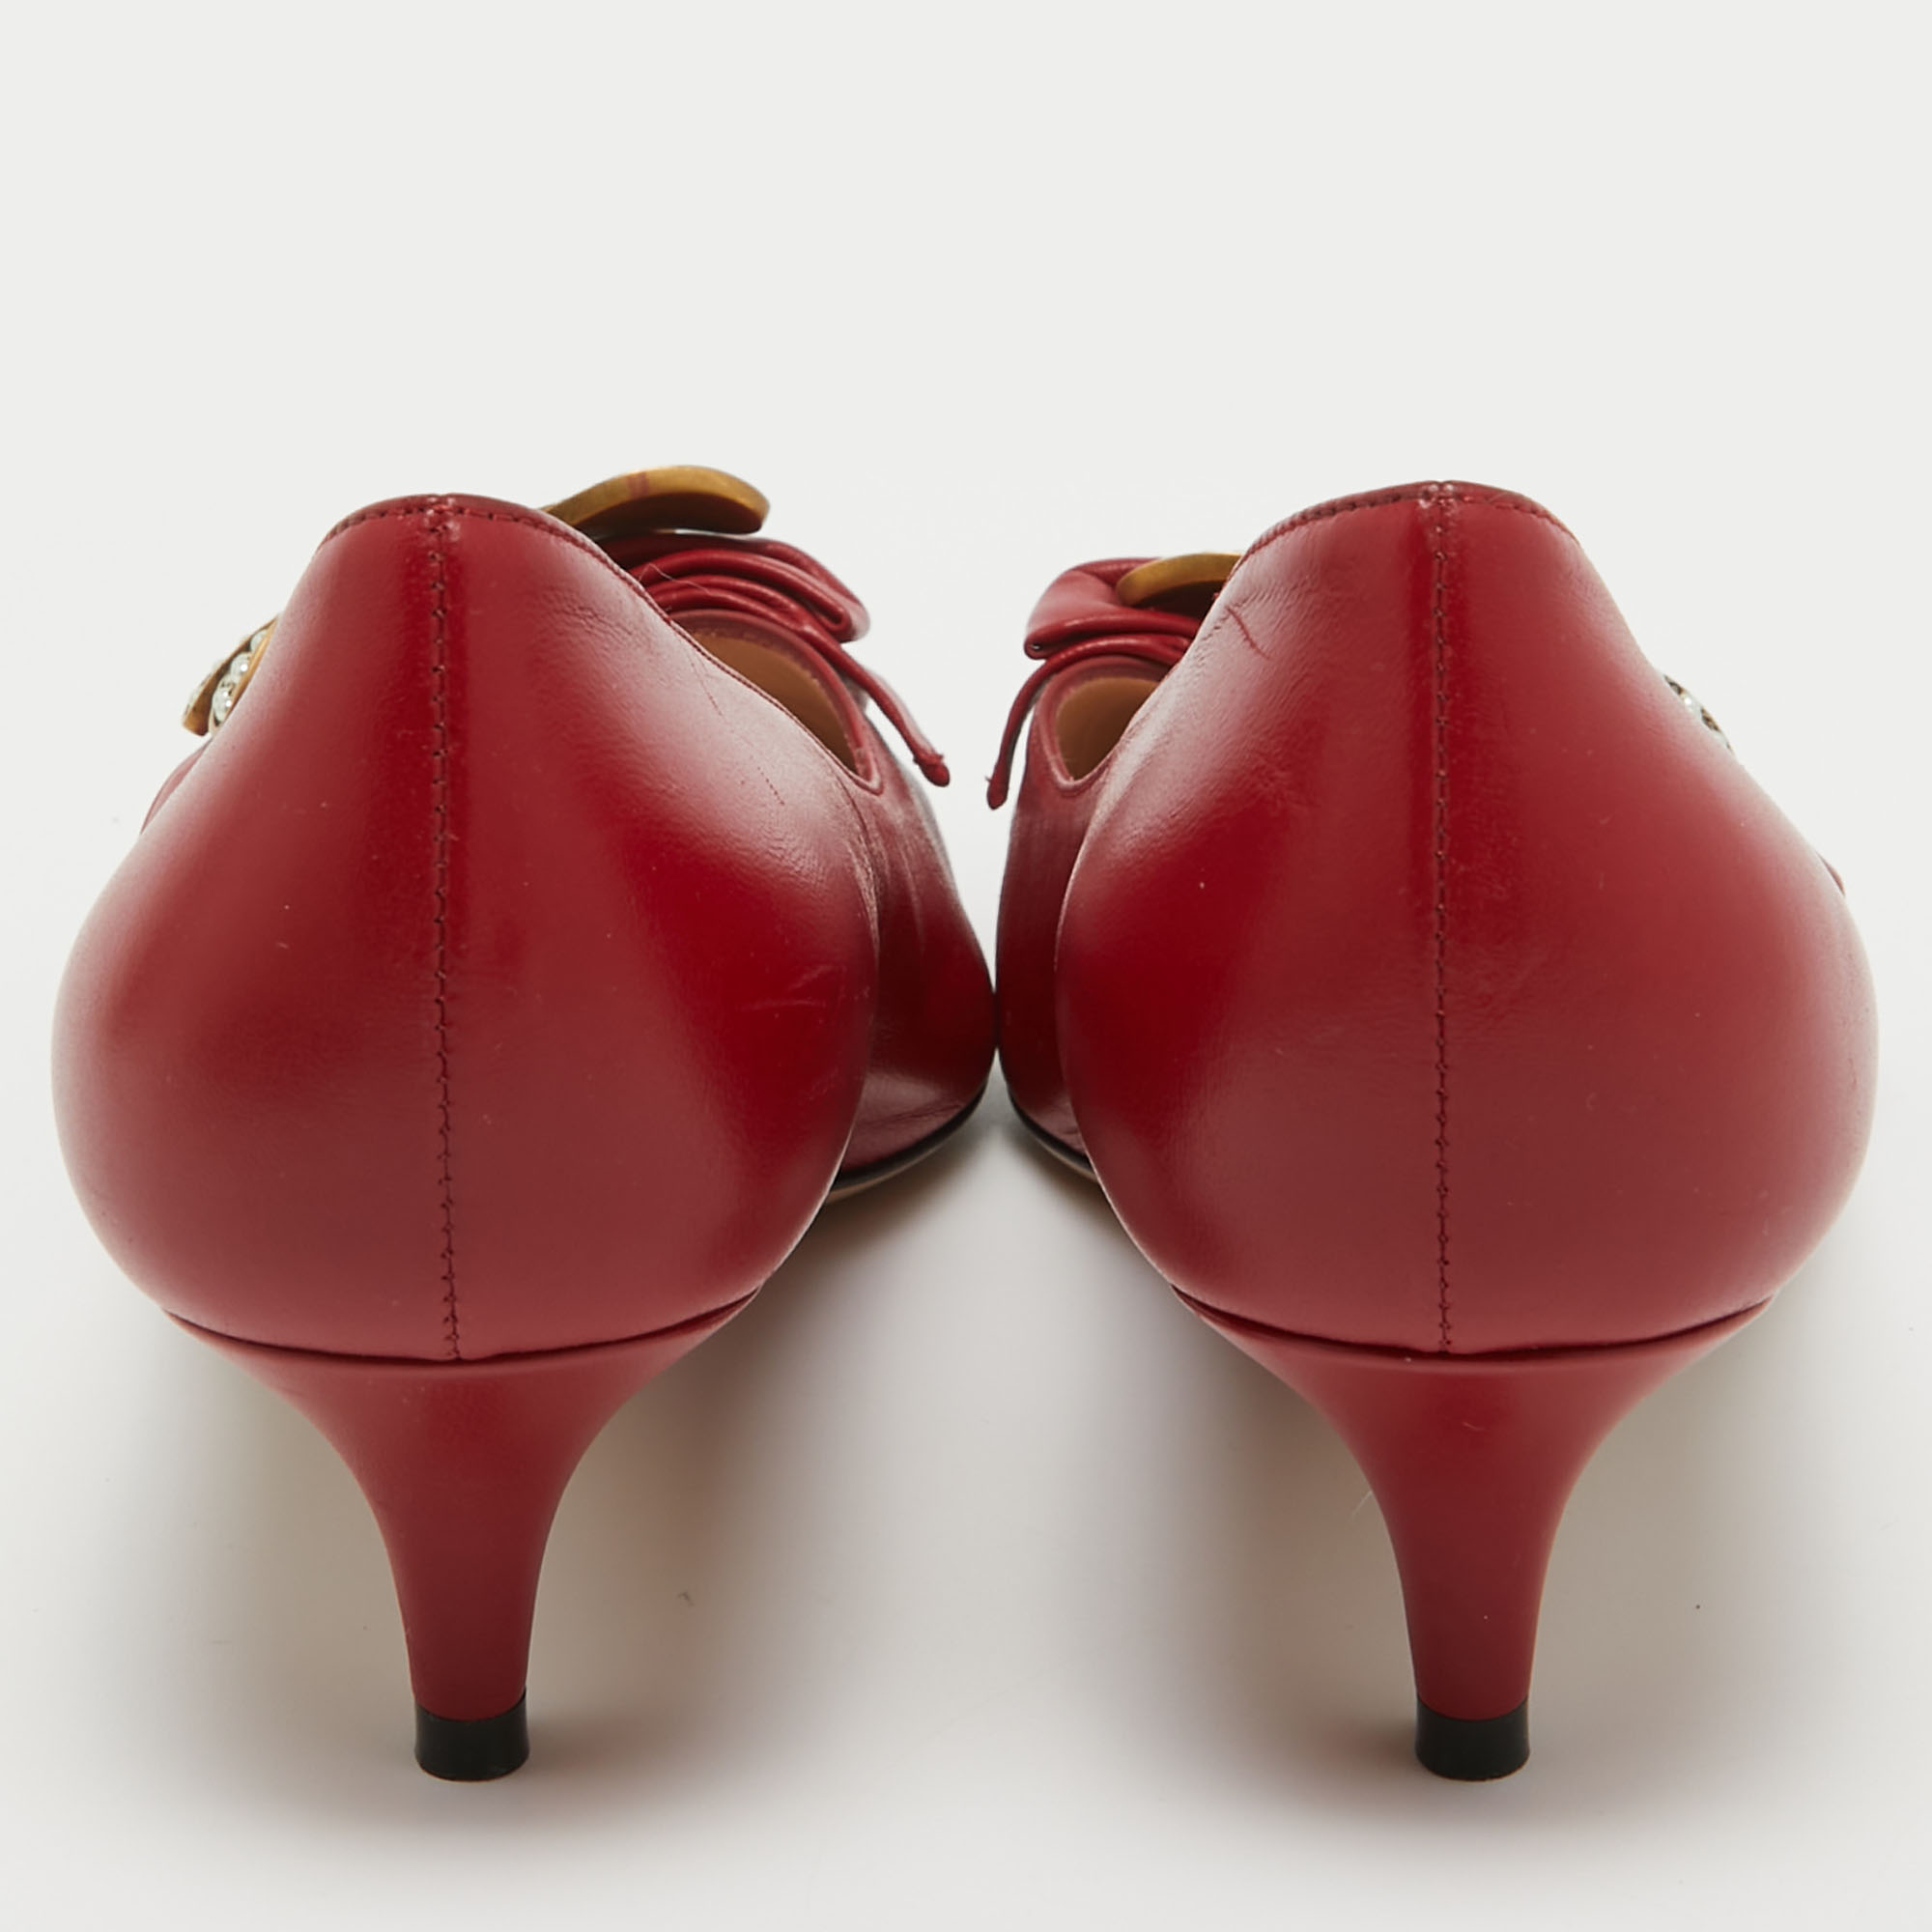 Gucci Red Leather Queen Margaret Bow Pumps Size 39